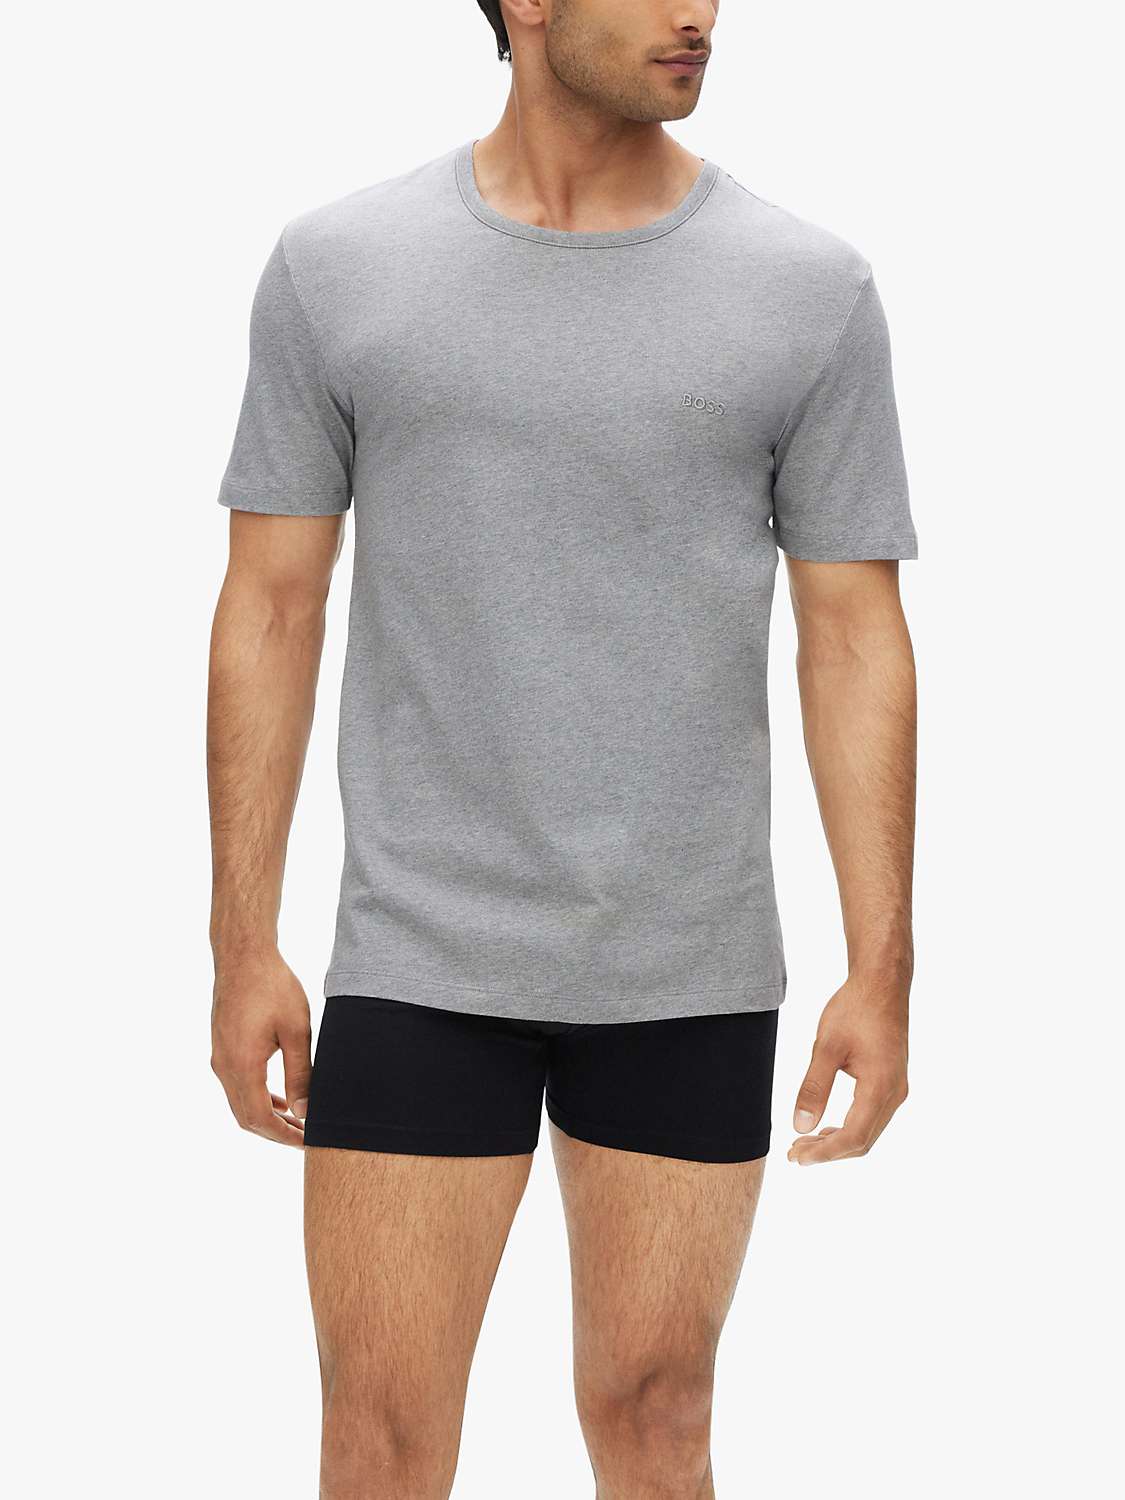 Buy BOSS Cotton Crew Neck Lounge T-Shirts, Pack of 3 Online at johnlewis.com